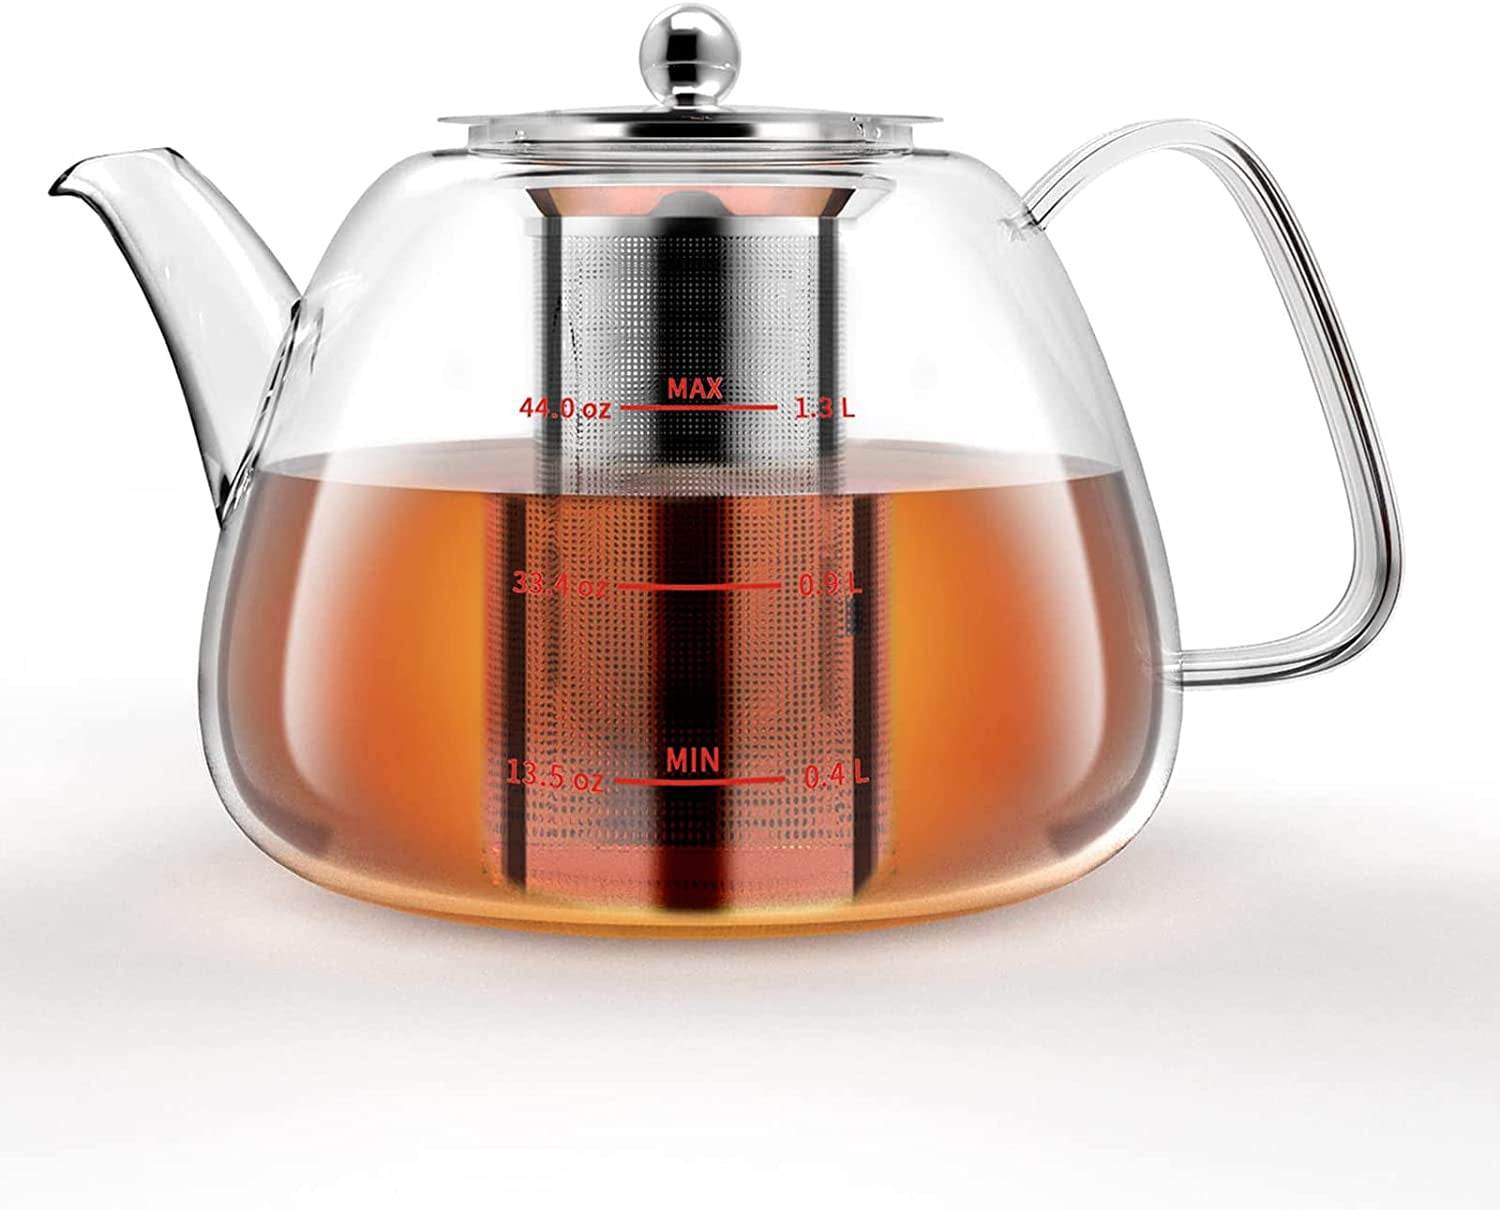 Teapot with Infuser for Loose Tea - 33oz, 4 Cup Tea Infuser, Clear Glass  Tea Kettle Pot with Strainer & Warmer - Loose Leaf, Iced Tea Maker & Brewer